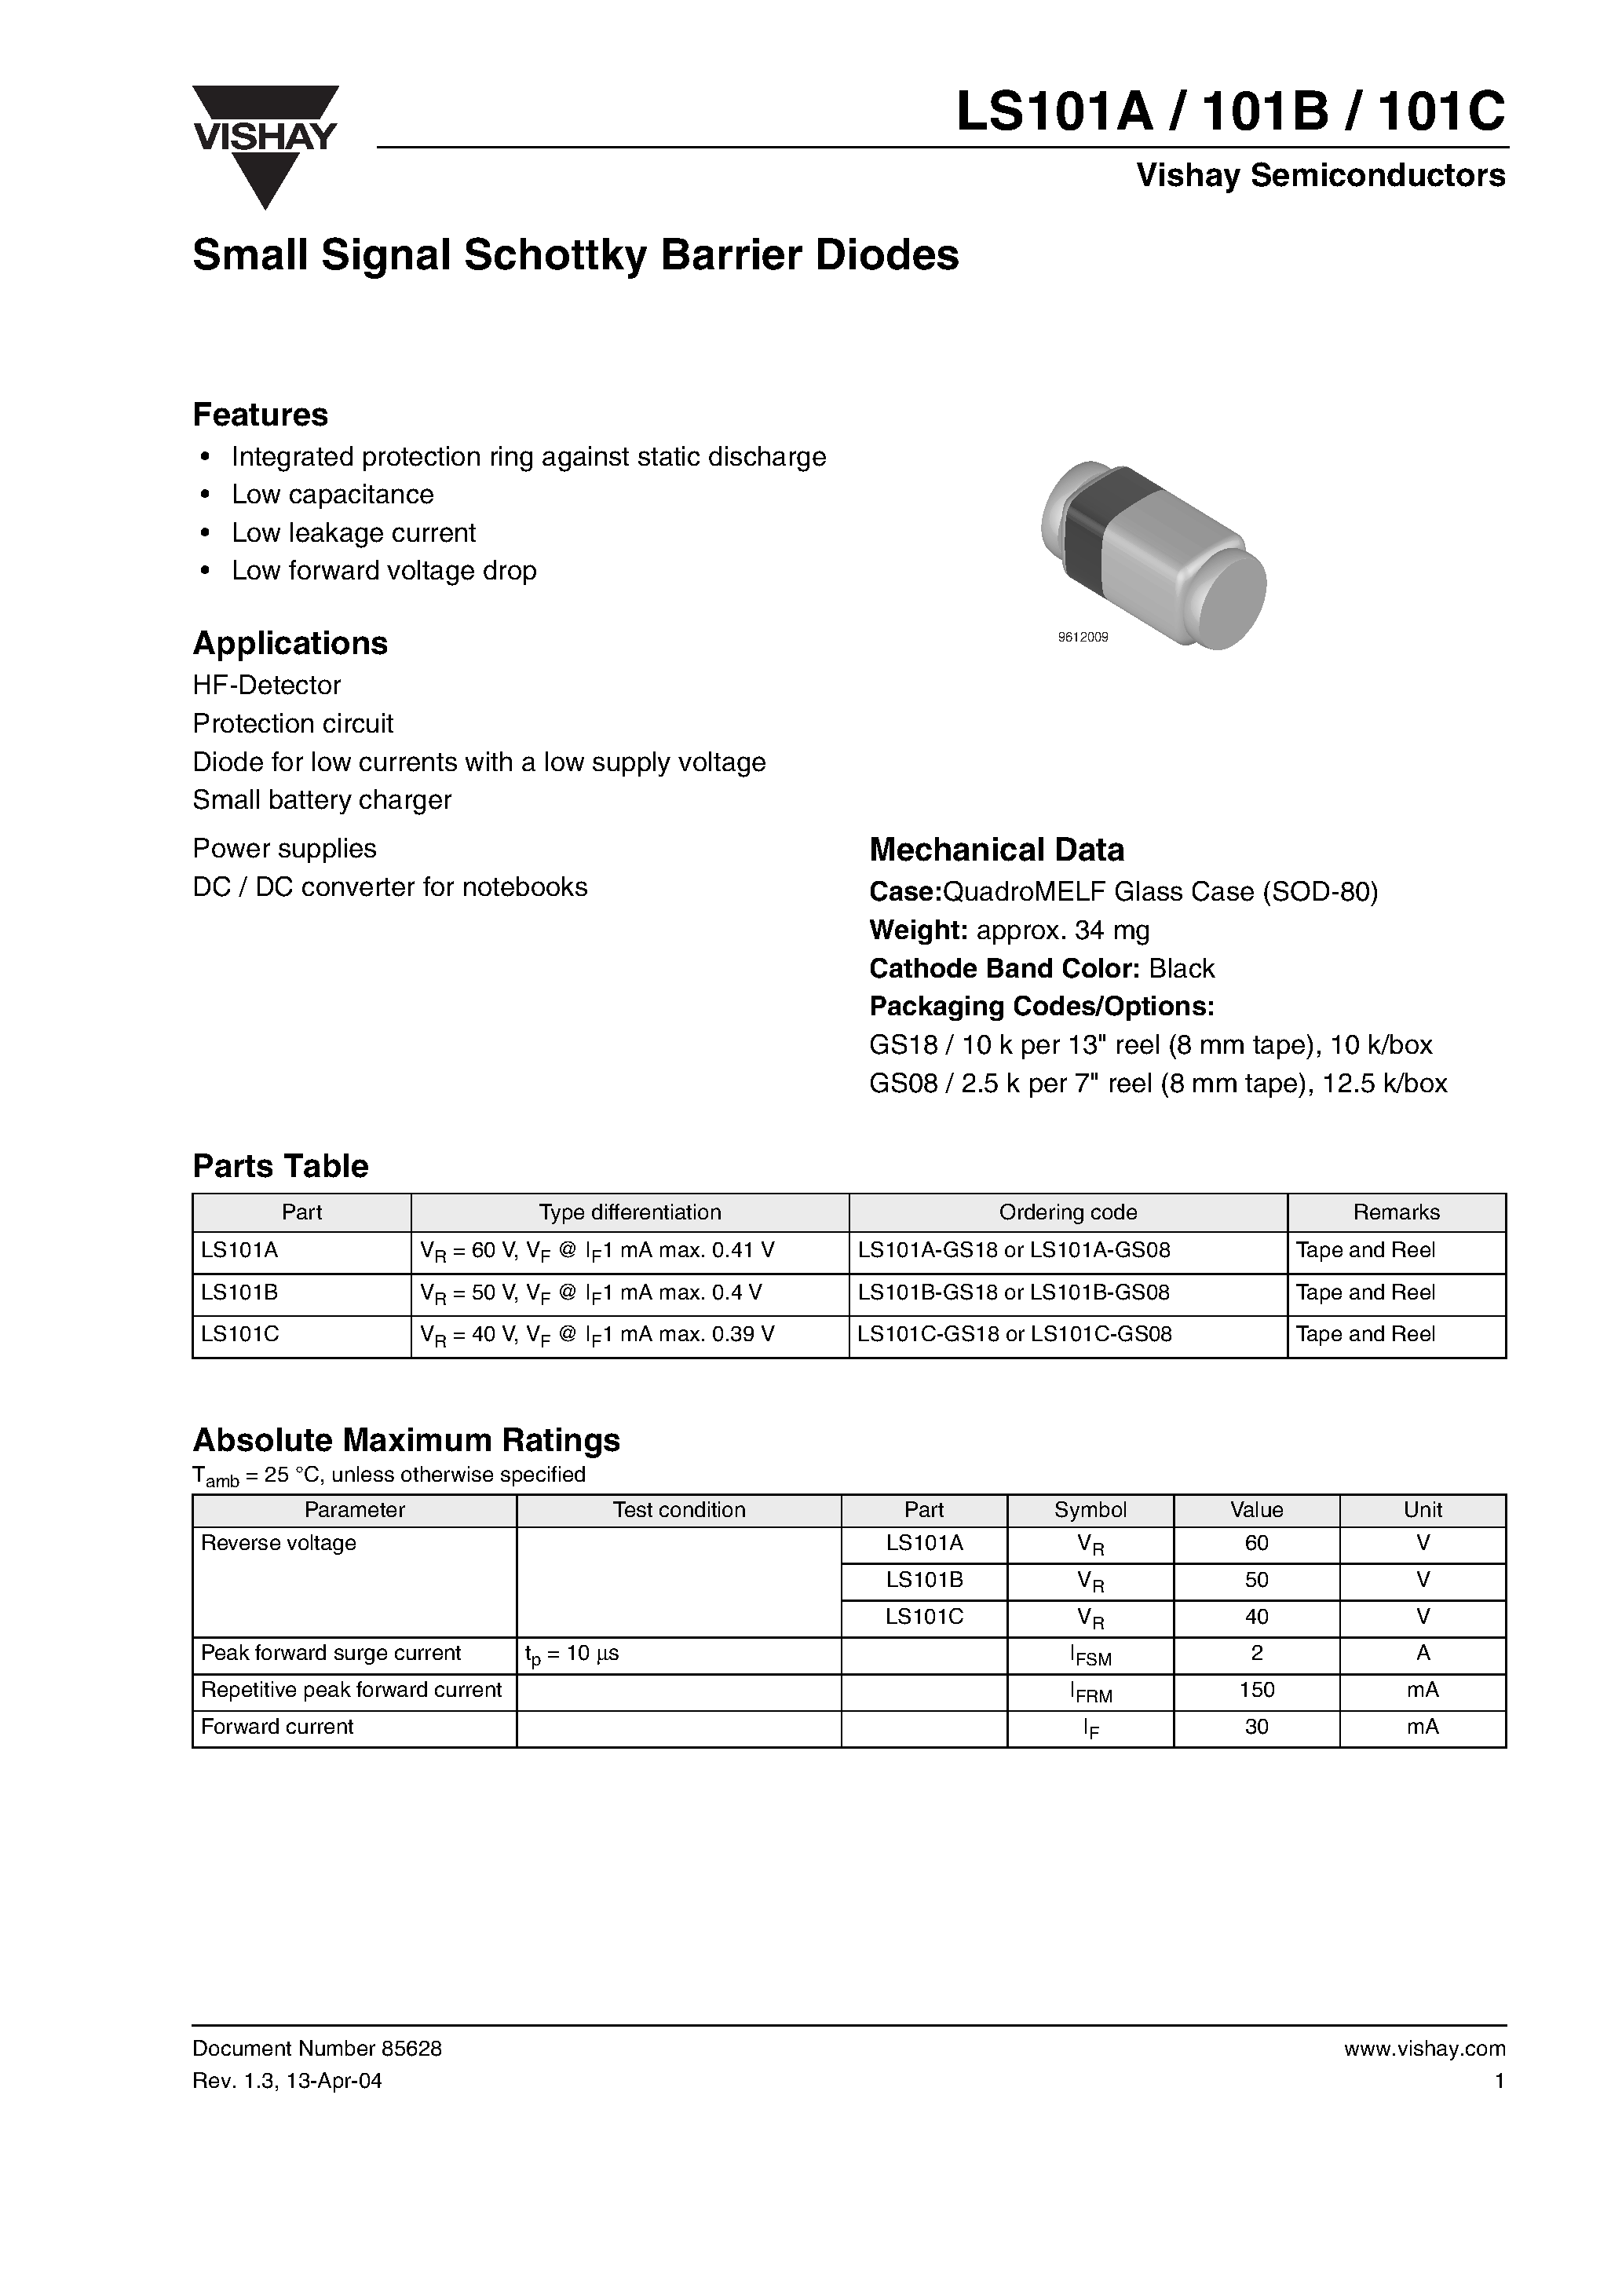 Datasheet LS101A-GS18 - Small Signal Schottky Barrier Diodes page 1